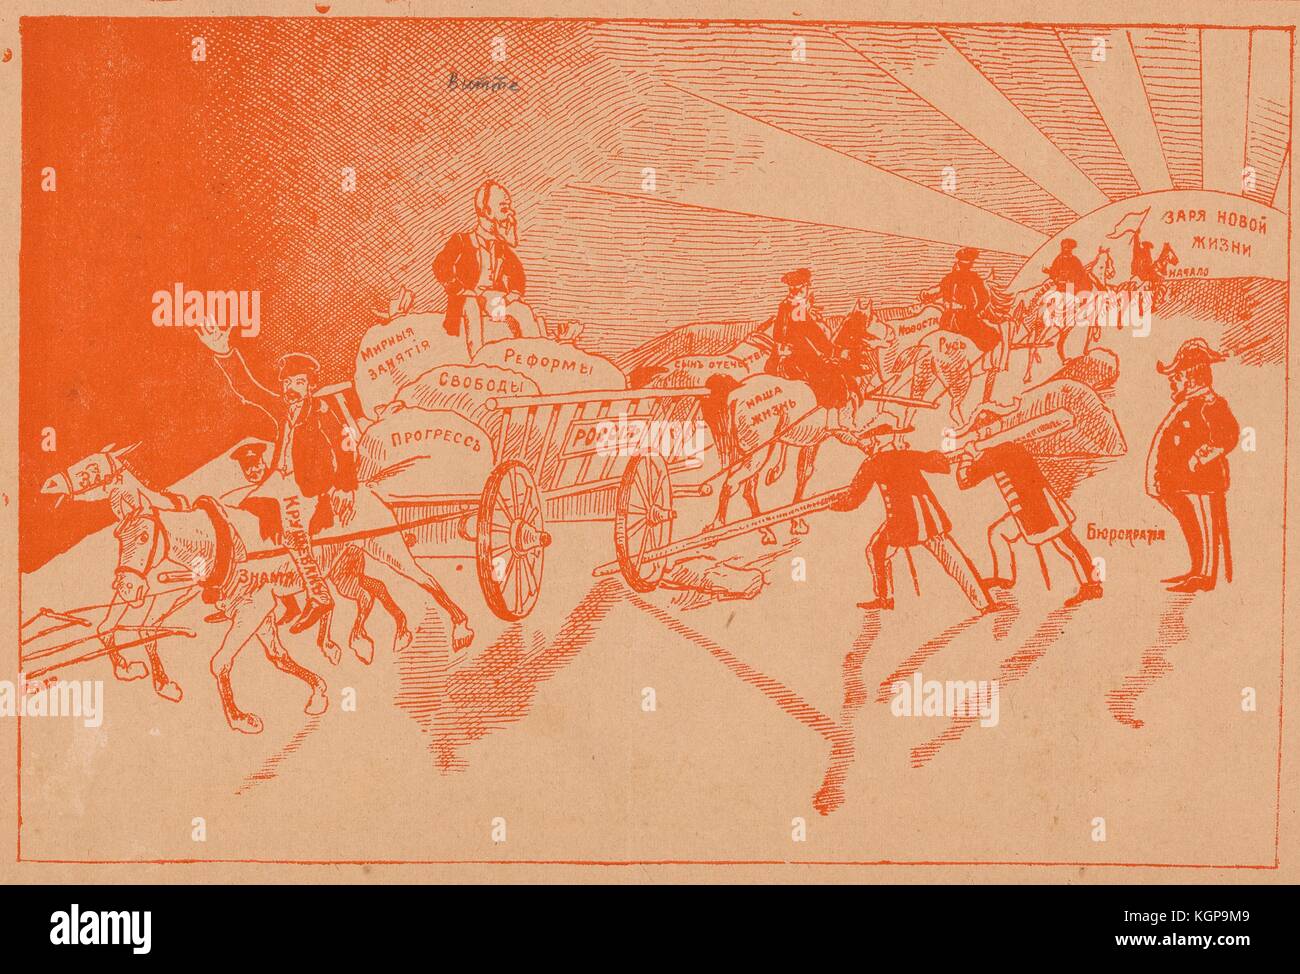 Cartoon from the Russian satirical journal Nagaechka (Little Whip) depicting a cart with 'Russia' written on it carrying sacks that say 'progress', 'reforms', 'freedom', and 'peaceful activities' with Tsar Nicholas II sitting on top, being pulled towards the sun, which says 'dawn of a new life', while some horses are being made to pull the cart away from the sun, and soldiers are trying to stop the cart by putting a large stick through one of the wheels; The horses pulling the the cart towards the sun have phrases associated with traditional Russian culture like 'son of the fatherland', 'news' Stock Photo